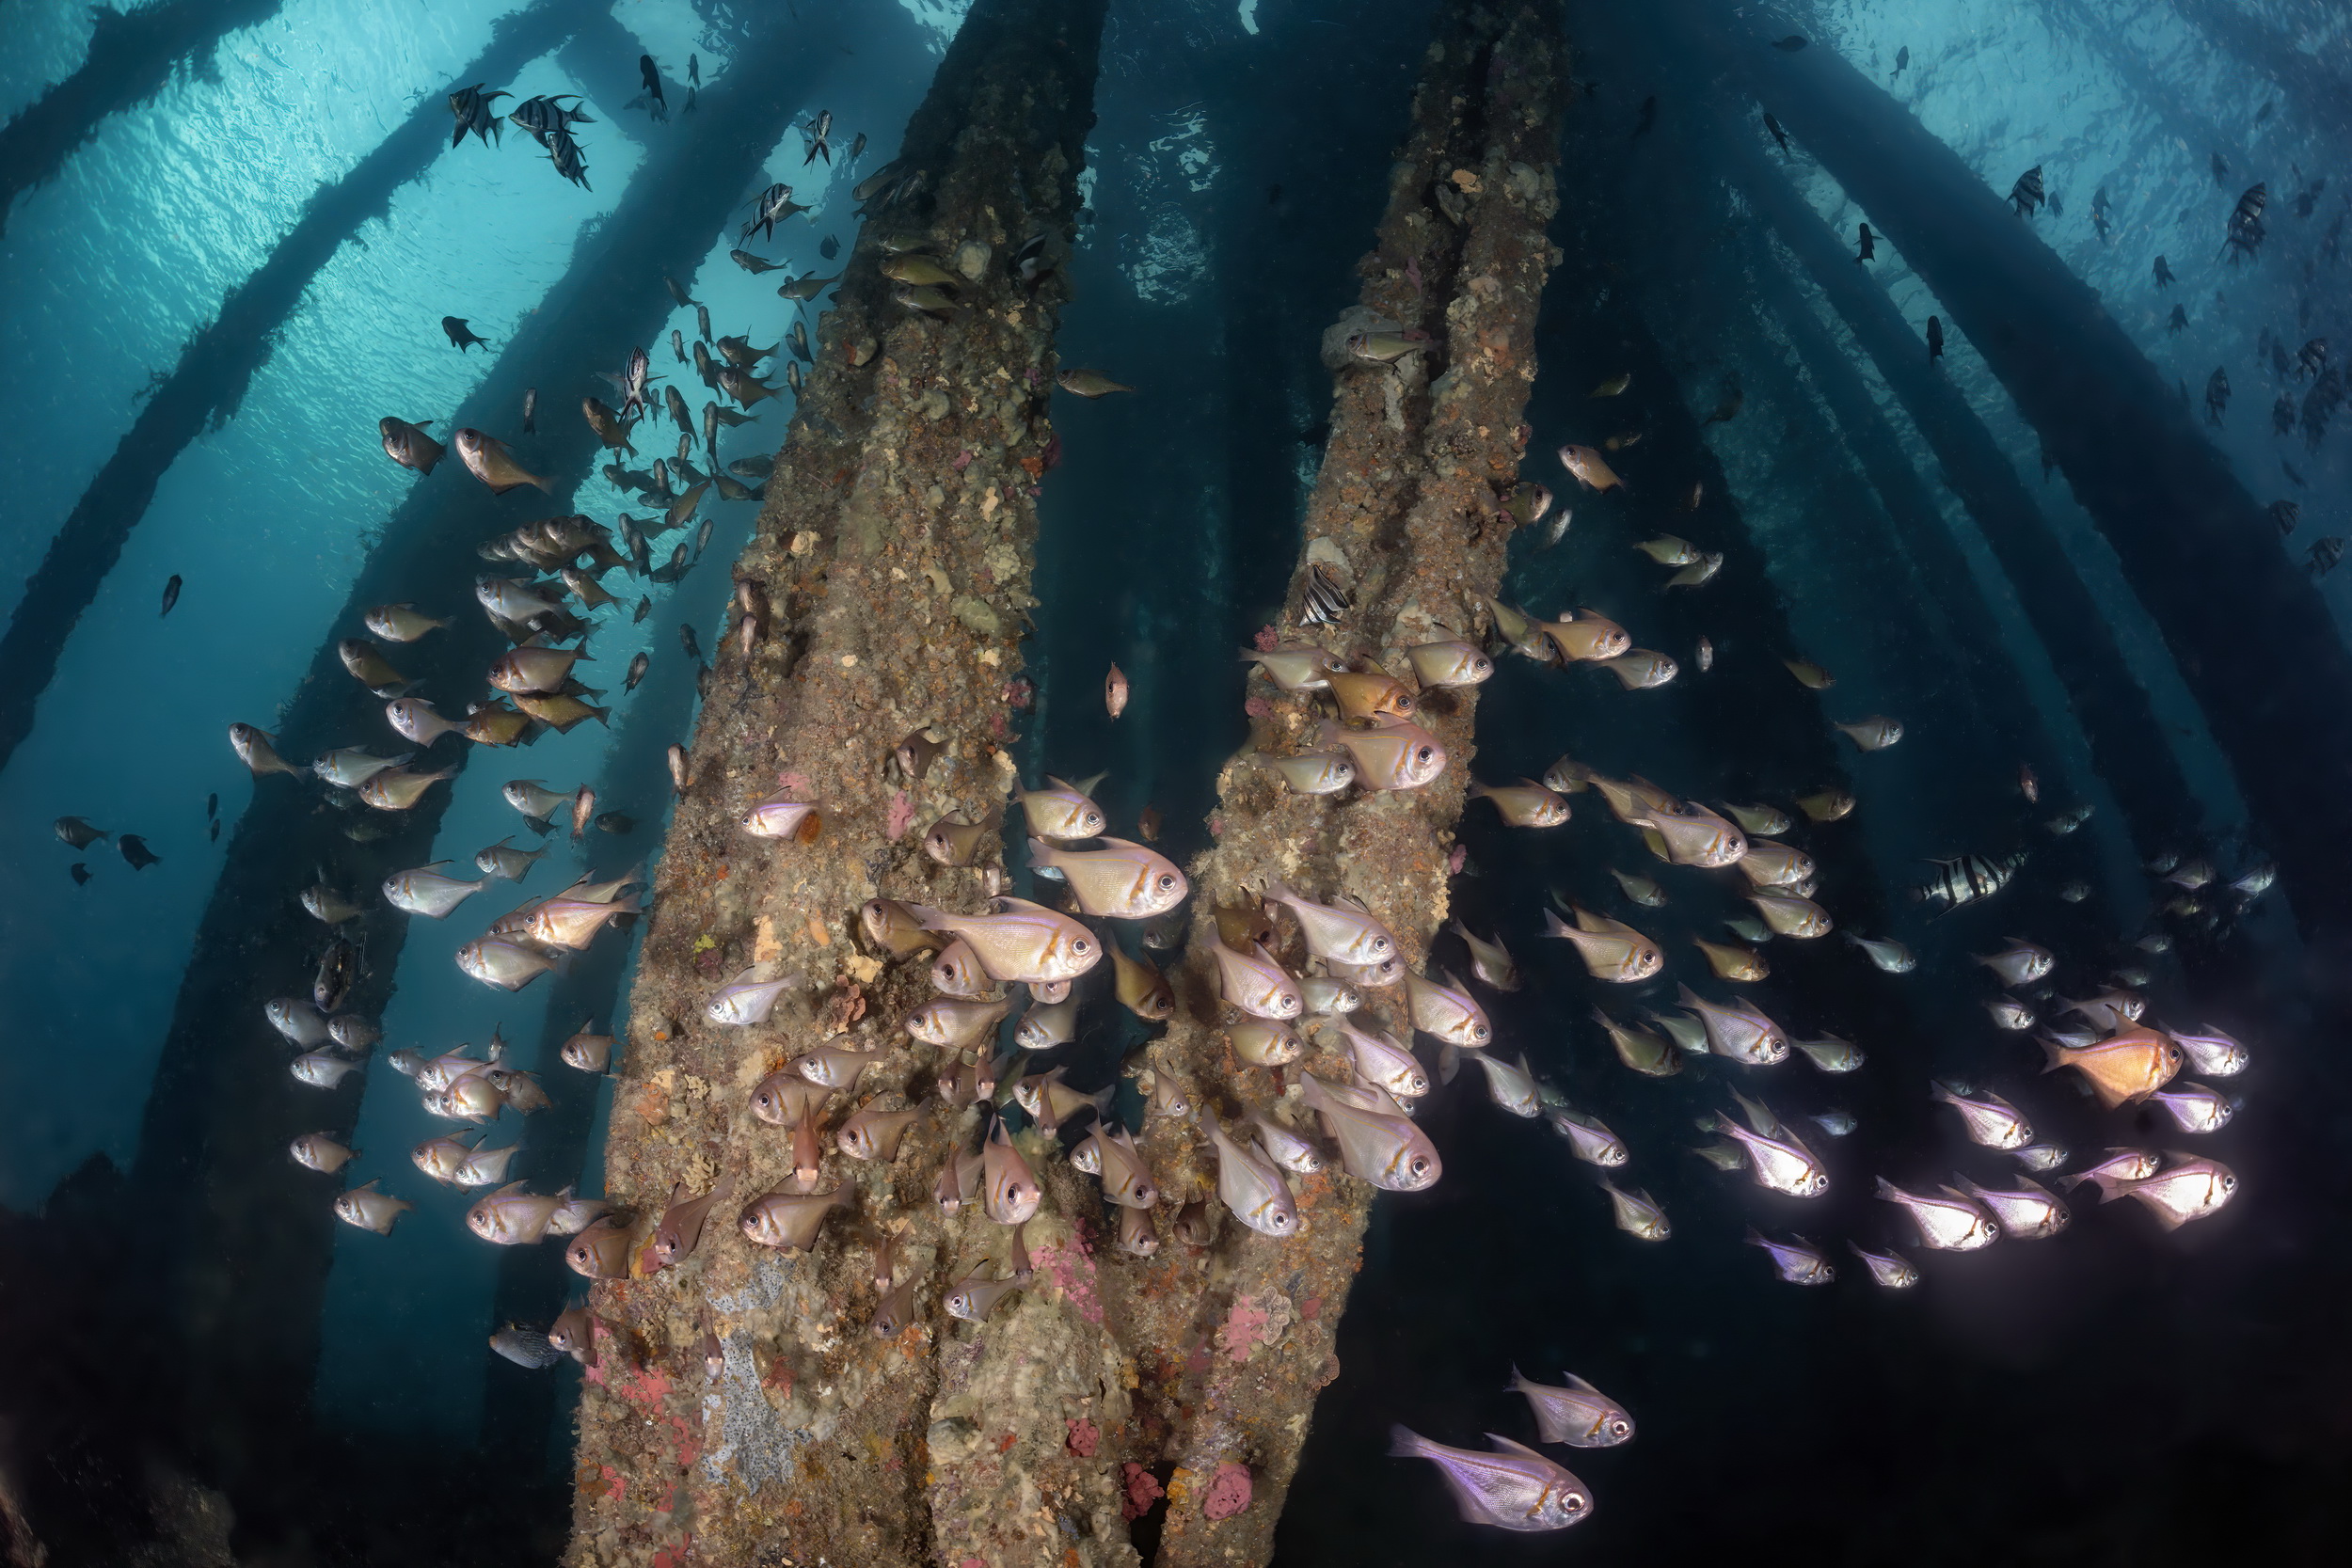 Sweepers under Rapid Bay Jetty, South Australia. Photo by Don Silcock